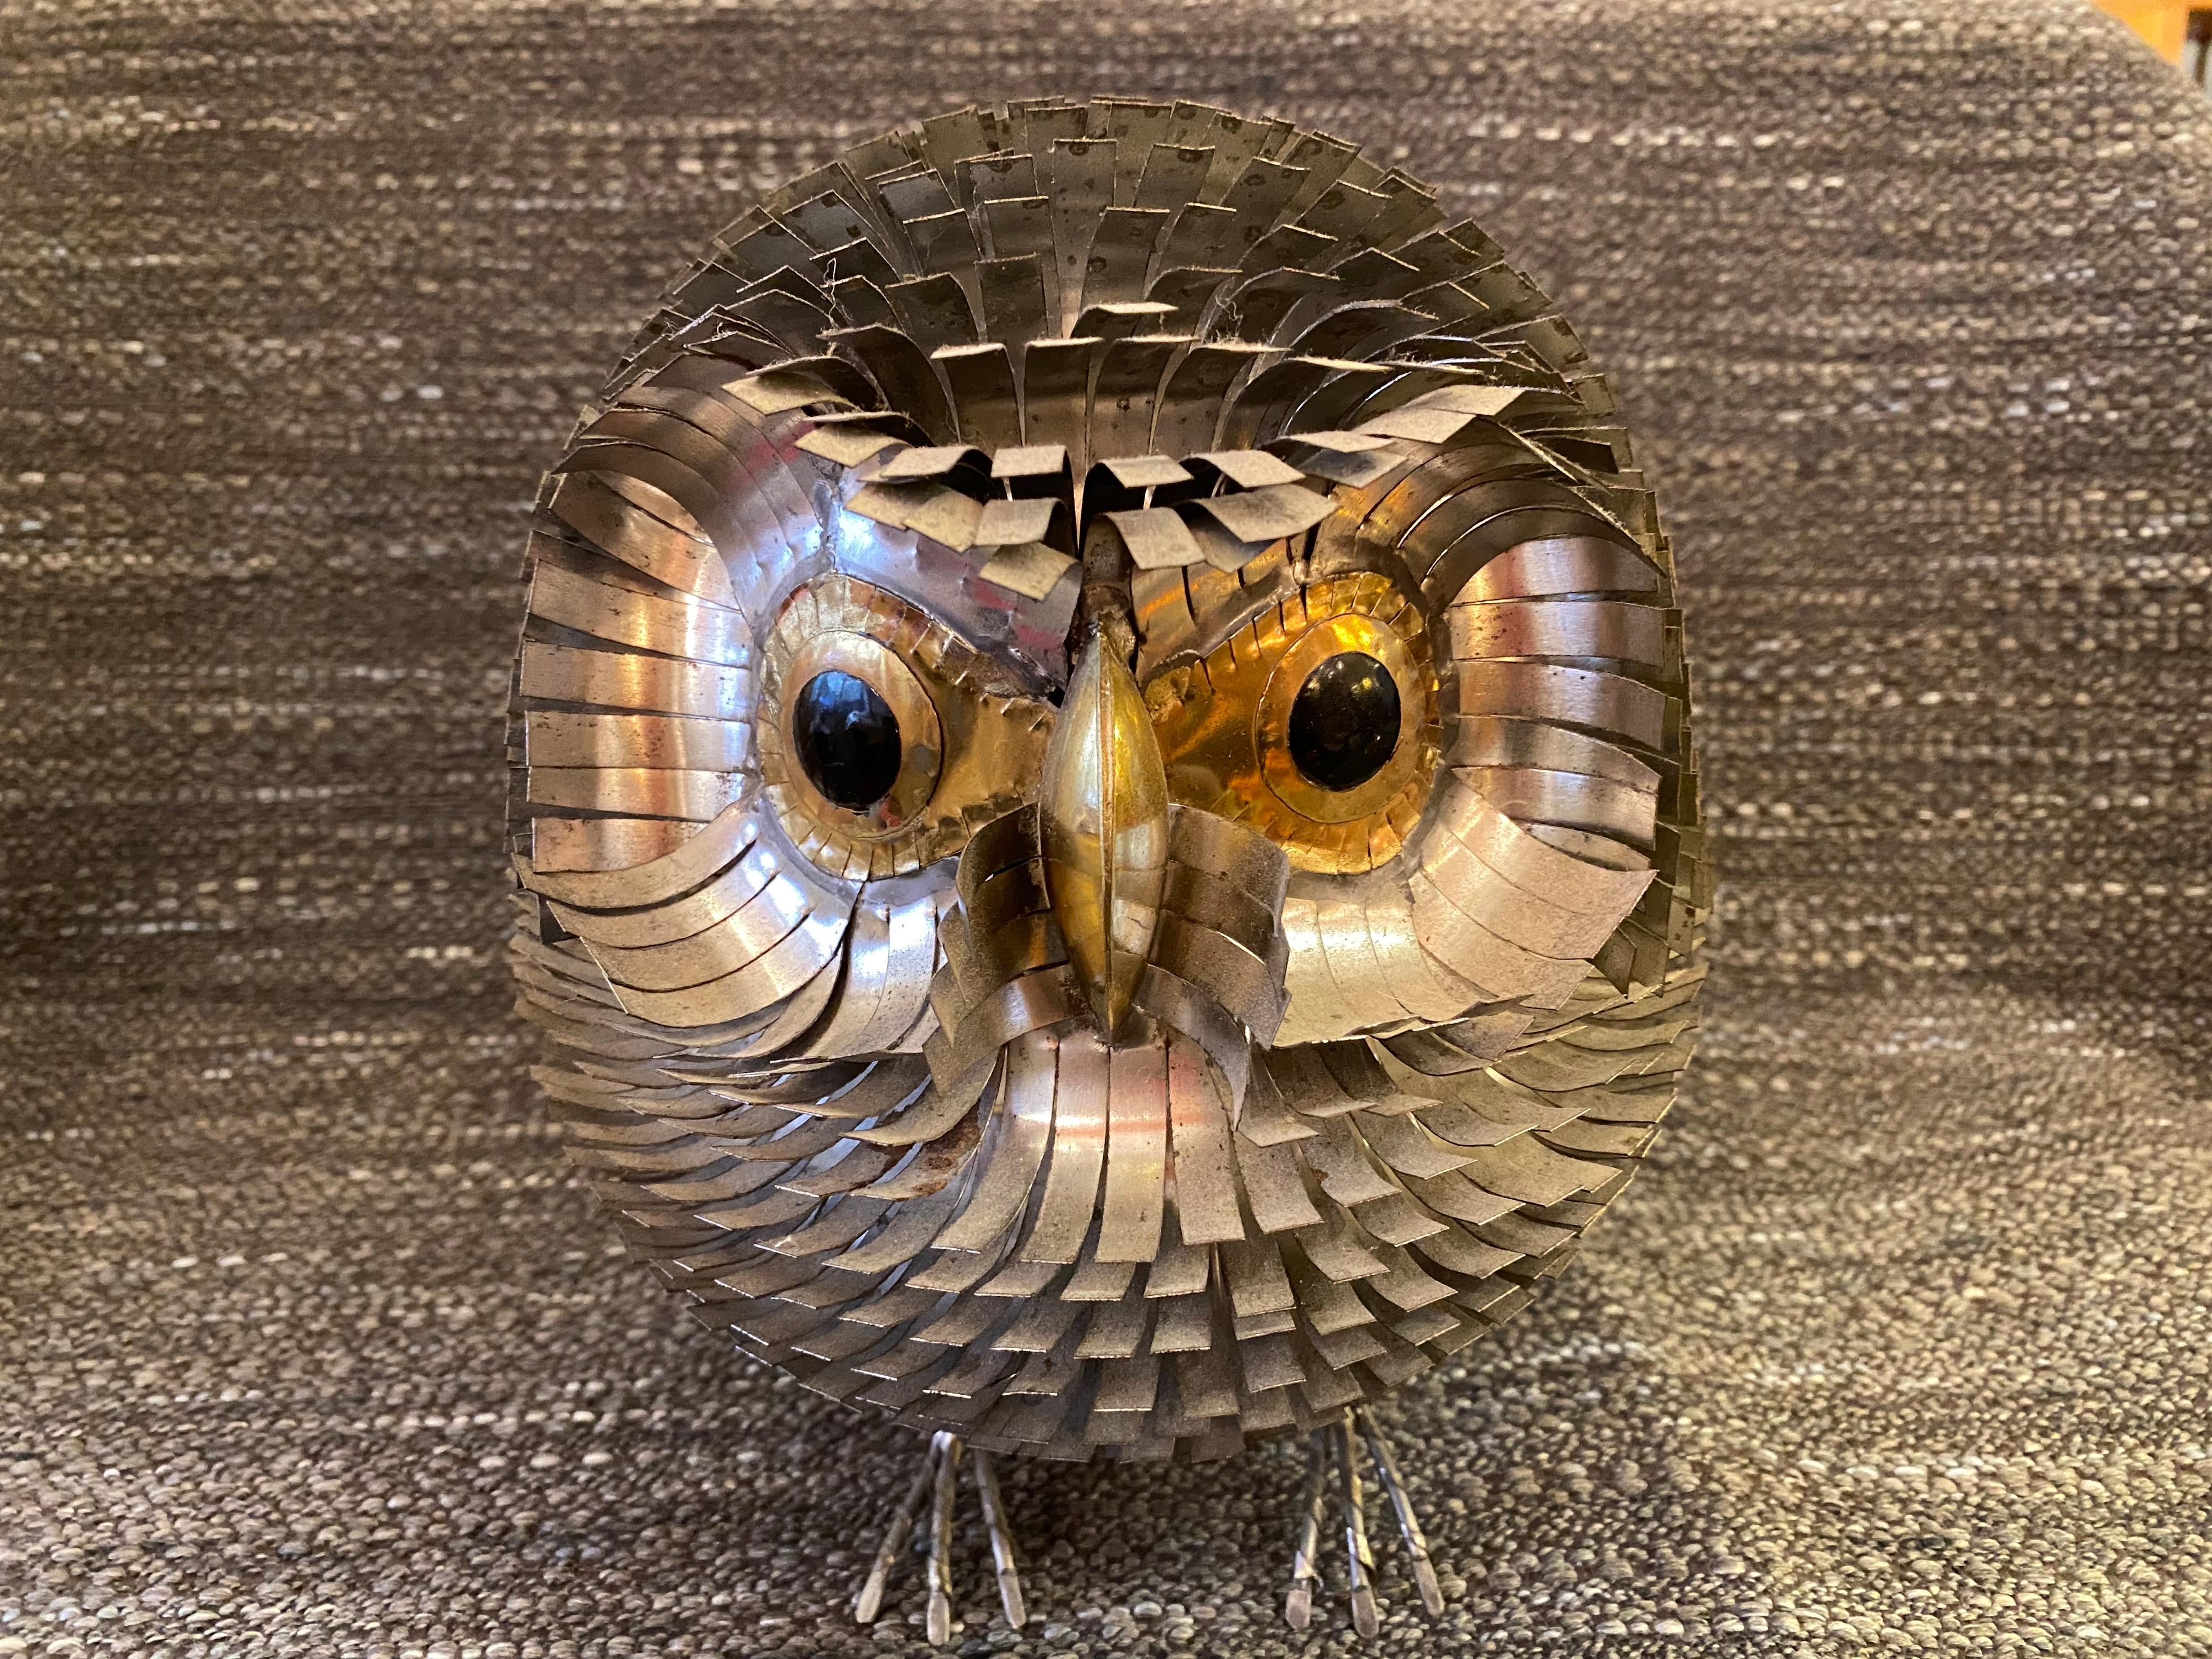 Jere' style tin or metal owl. Hand crafted, possibly made in Mexico and imported. Great whimsical Design, has the look of a giant pine cone!